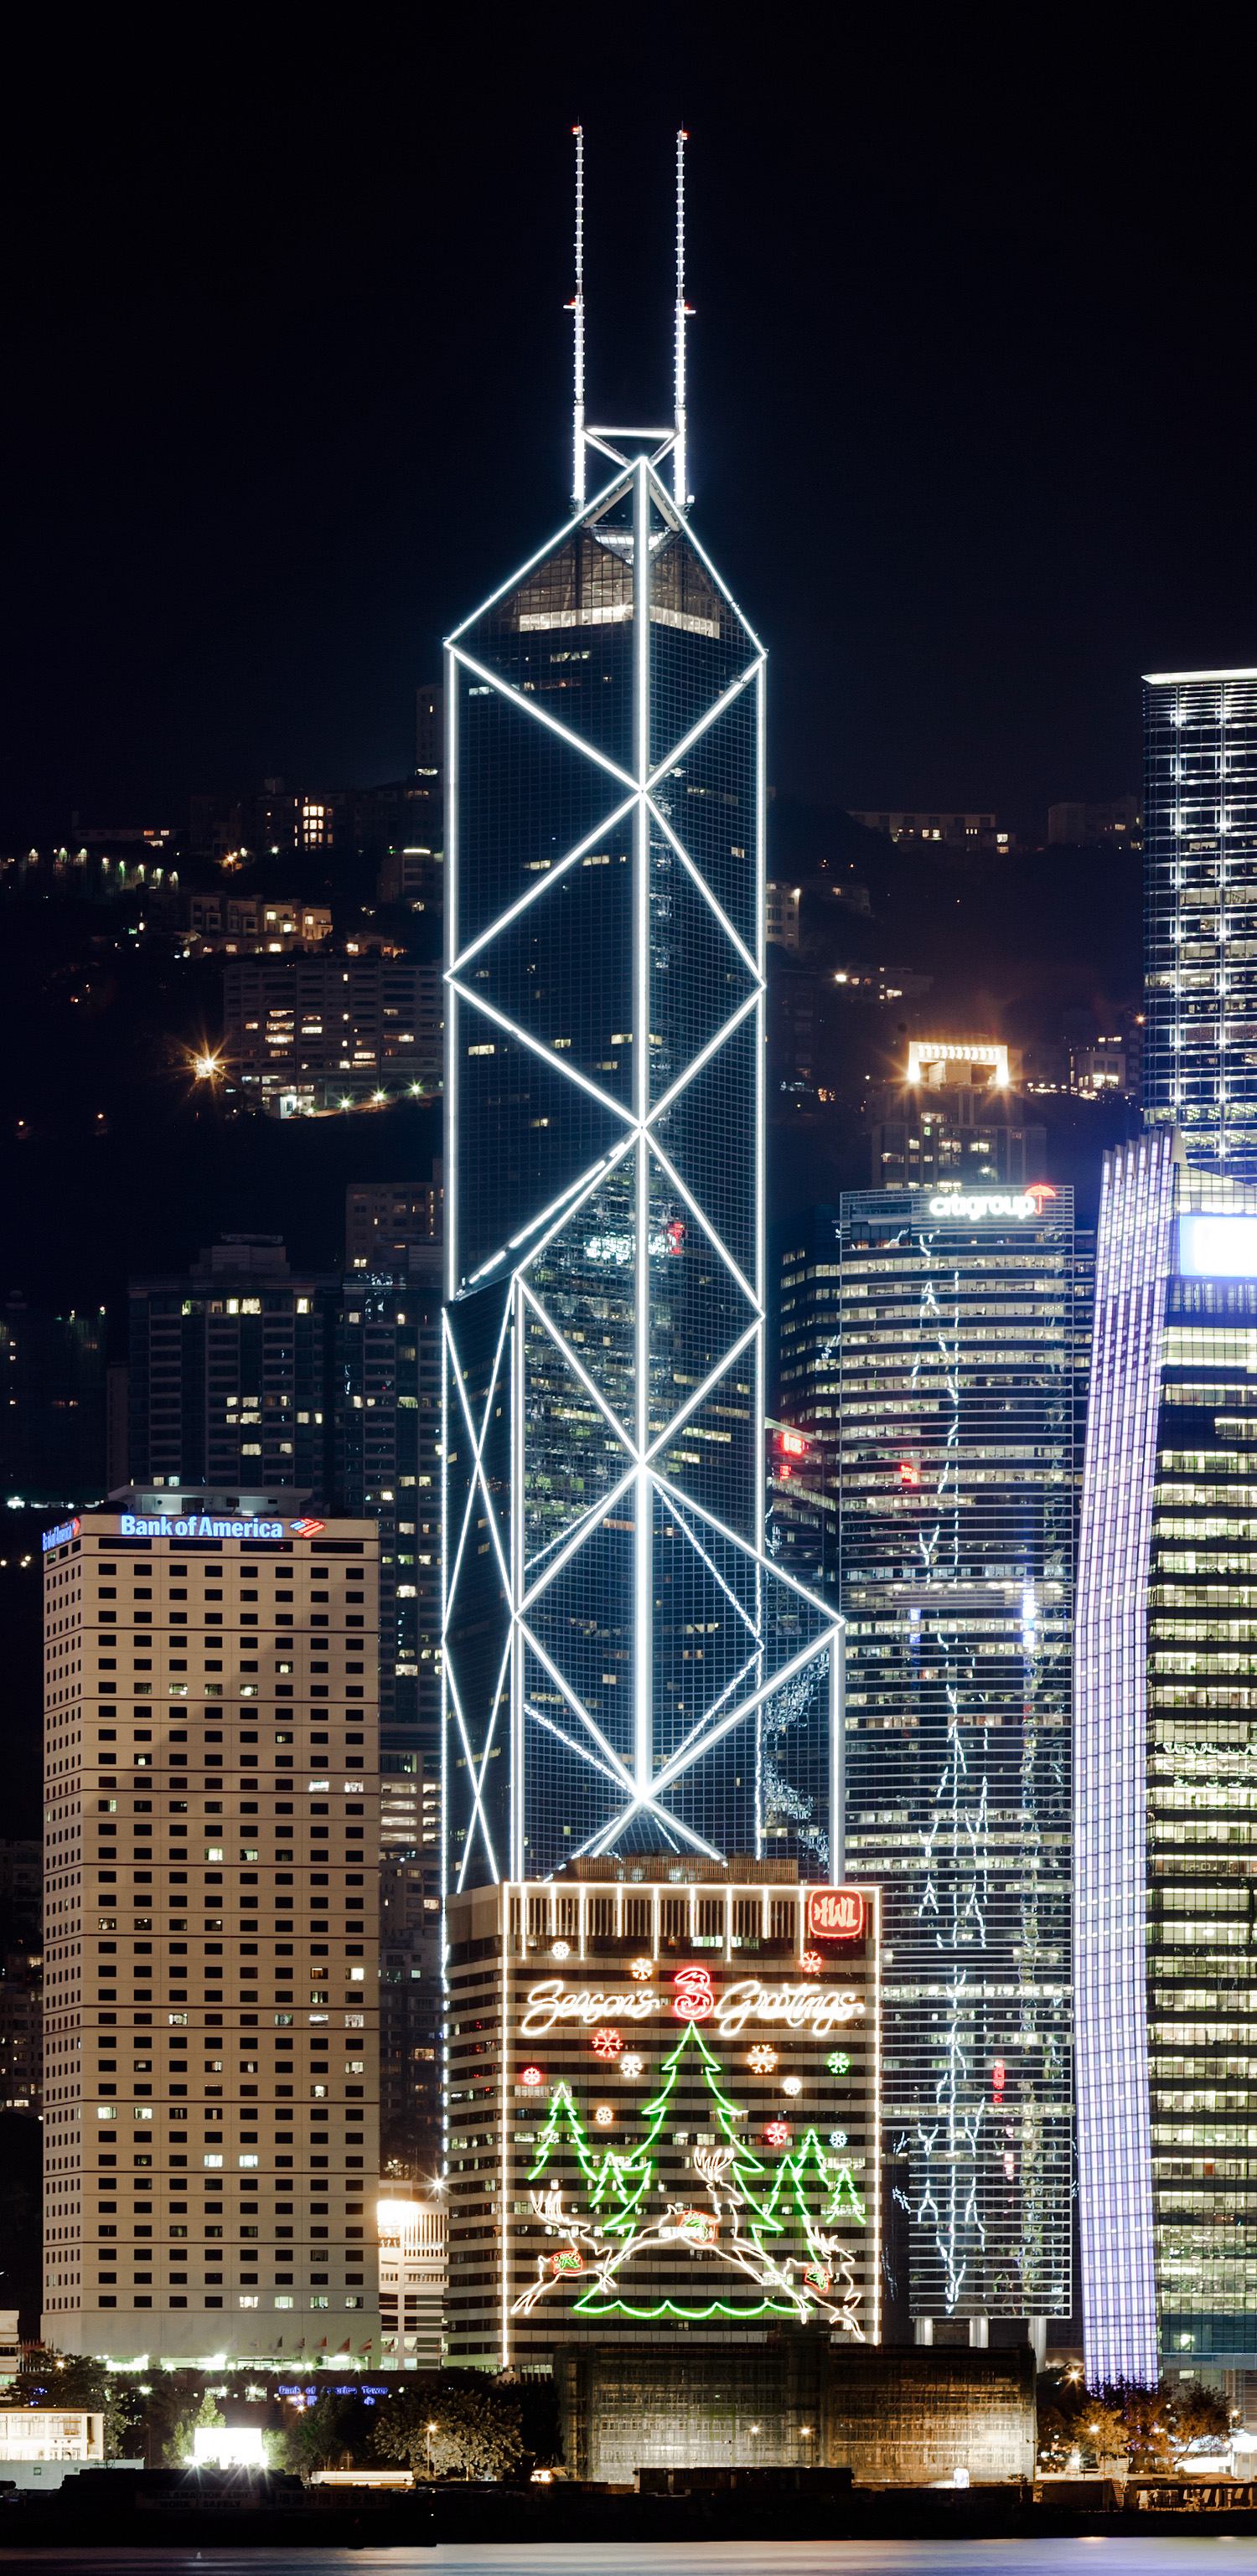 Bank of China Tower - View from Kowloon 